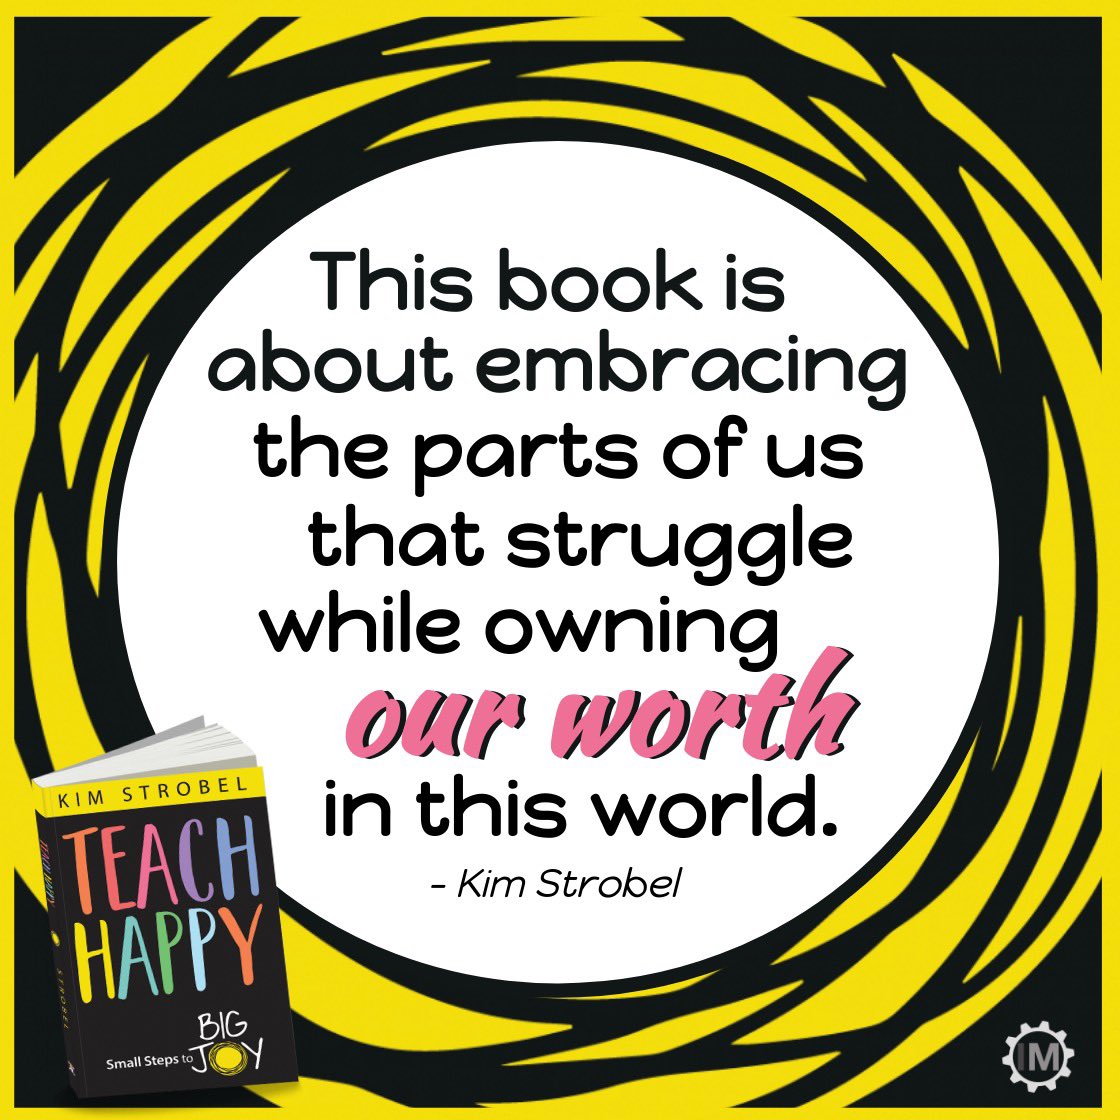 'This book is about embracing the parts of us that struggle while owning our worth in this world.' - Kim Strobel in #TeachHappy a.co/d/4lSo7BP #dbcincbooks #tlap @HappyStrobel @strobeled